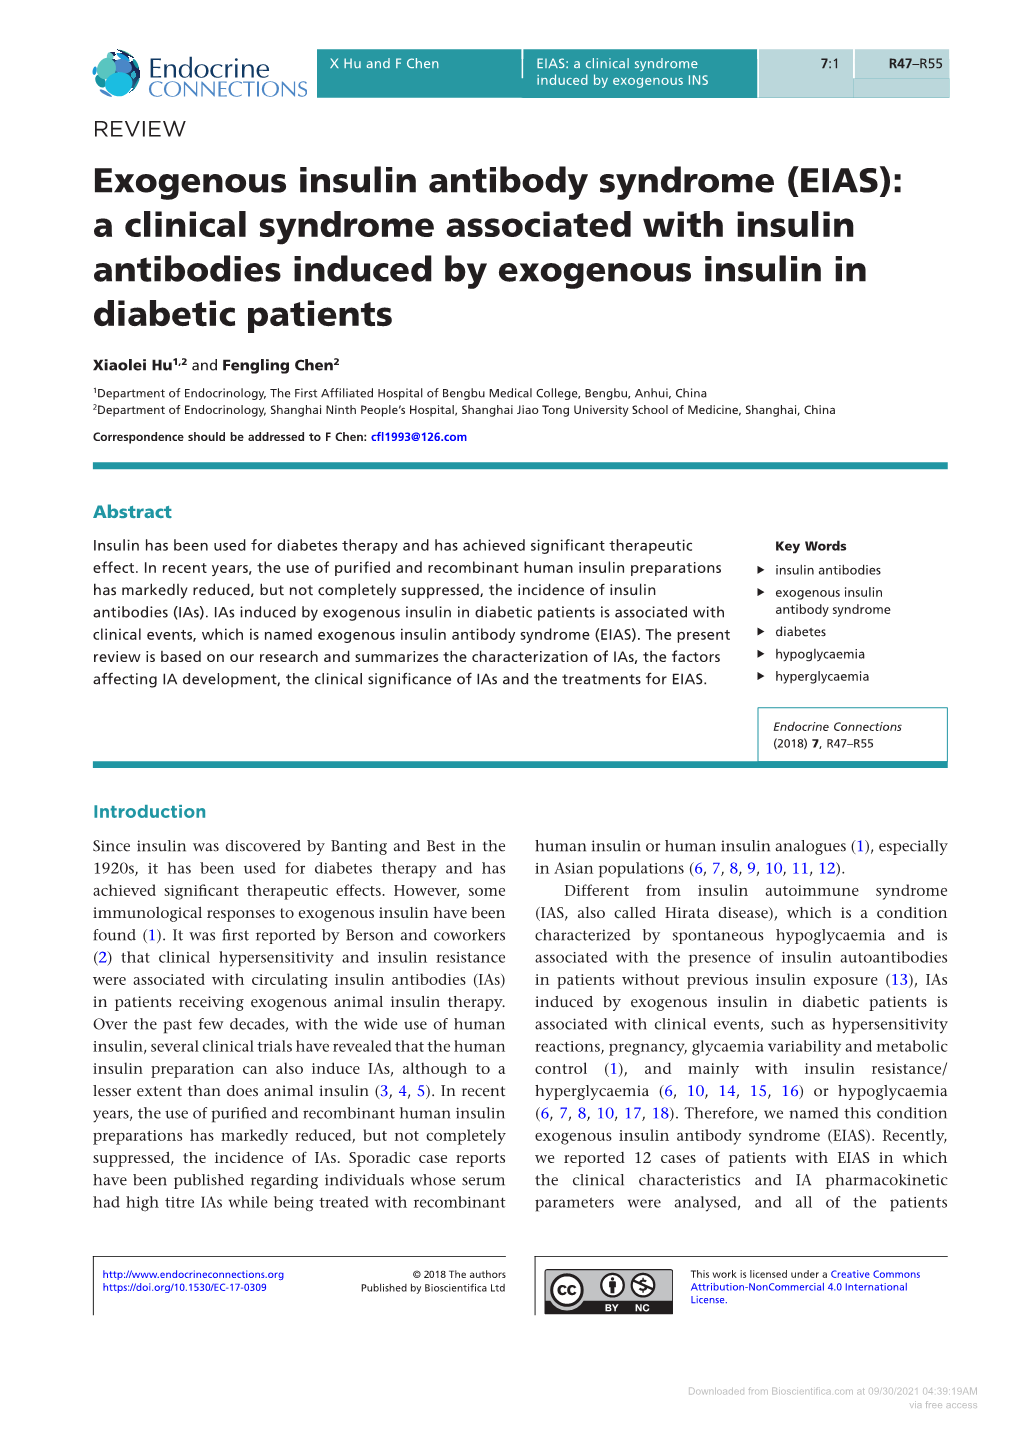 Exogenous Insulin Antibody Syndrome (EIAS): a Clinical Syndrome Associated with Insulin Antibodies Induced by Exogenous Insulin in Diabetic Patients